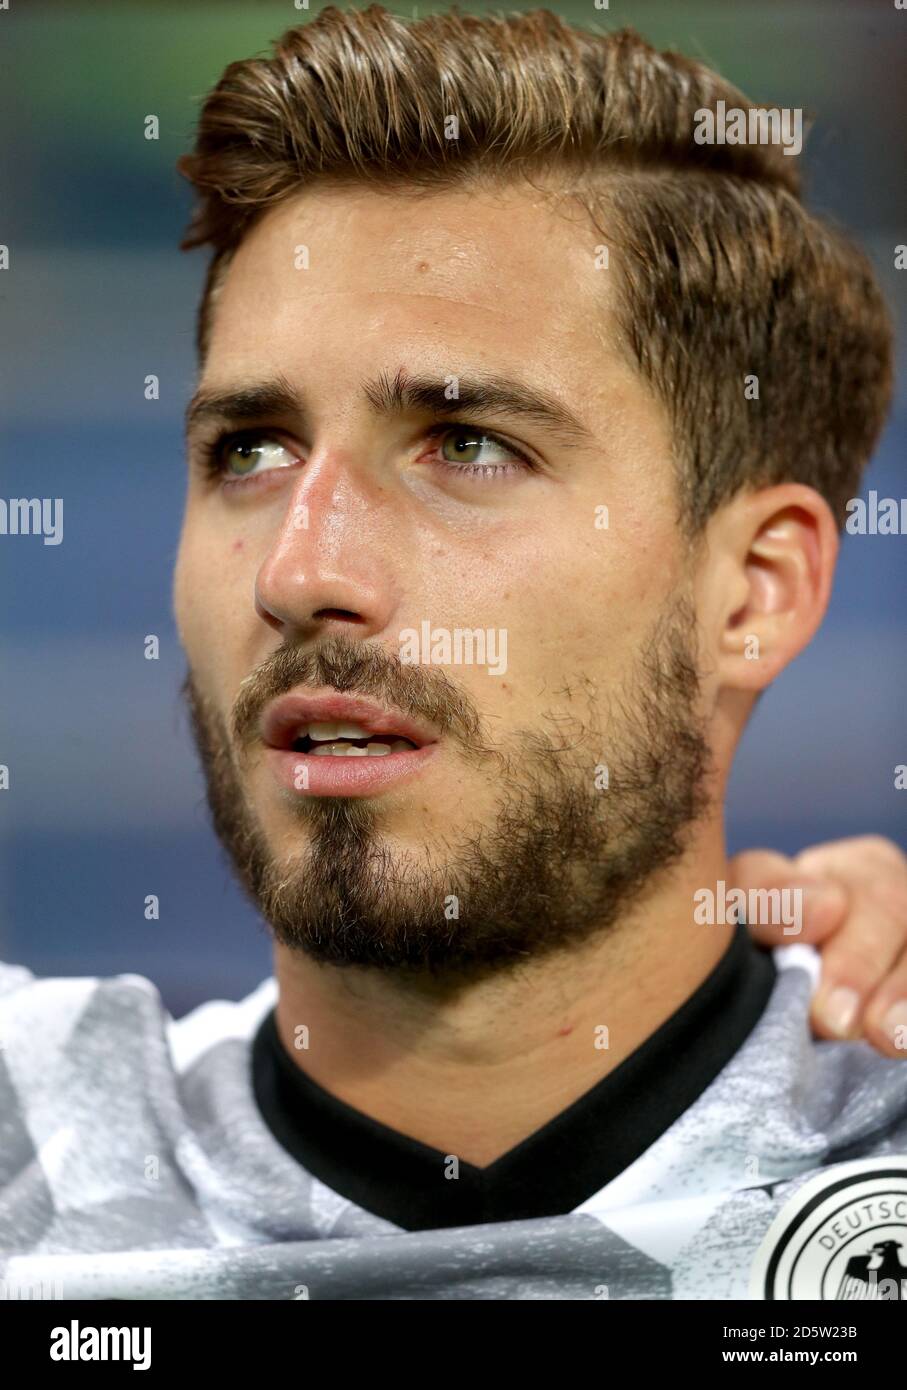 3718 Kevin Trapp Germany Photos and Premium High Res Pictures  Getty  Images